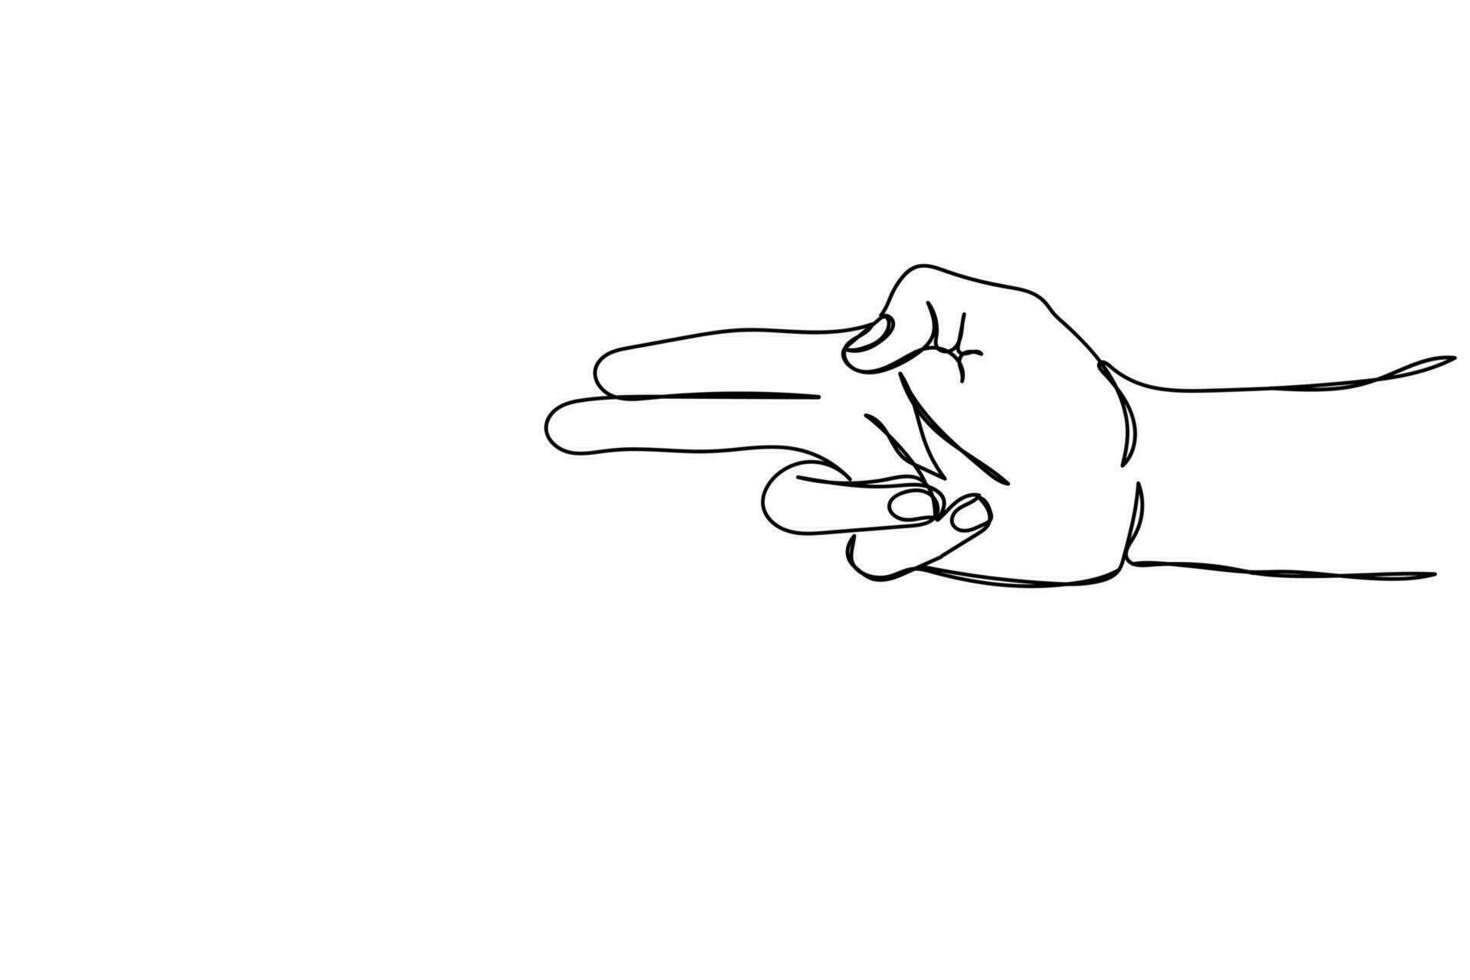 Pointing finger. Hand signal. vector